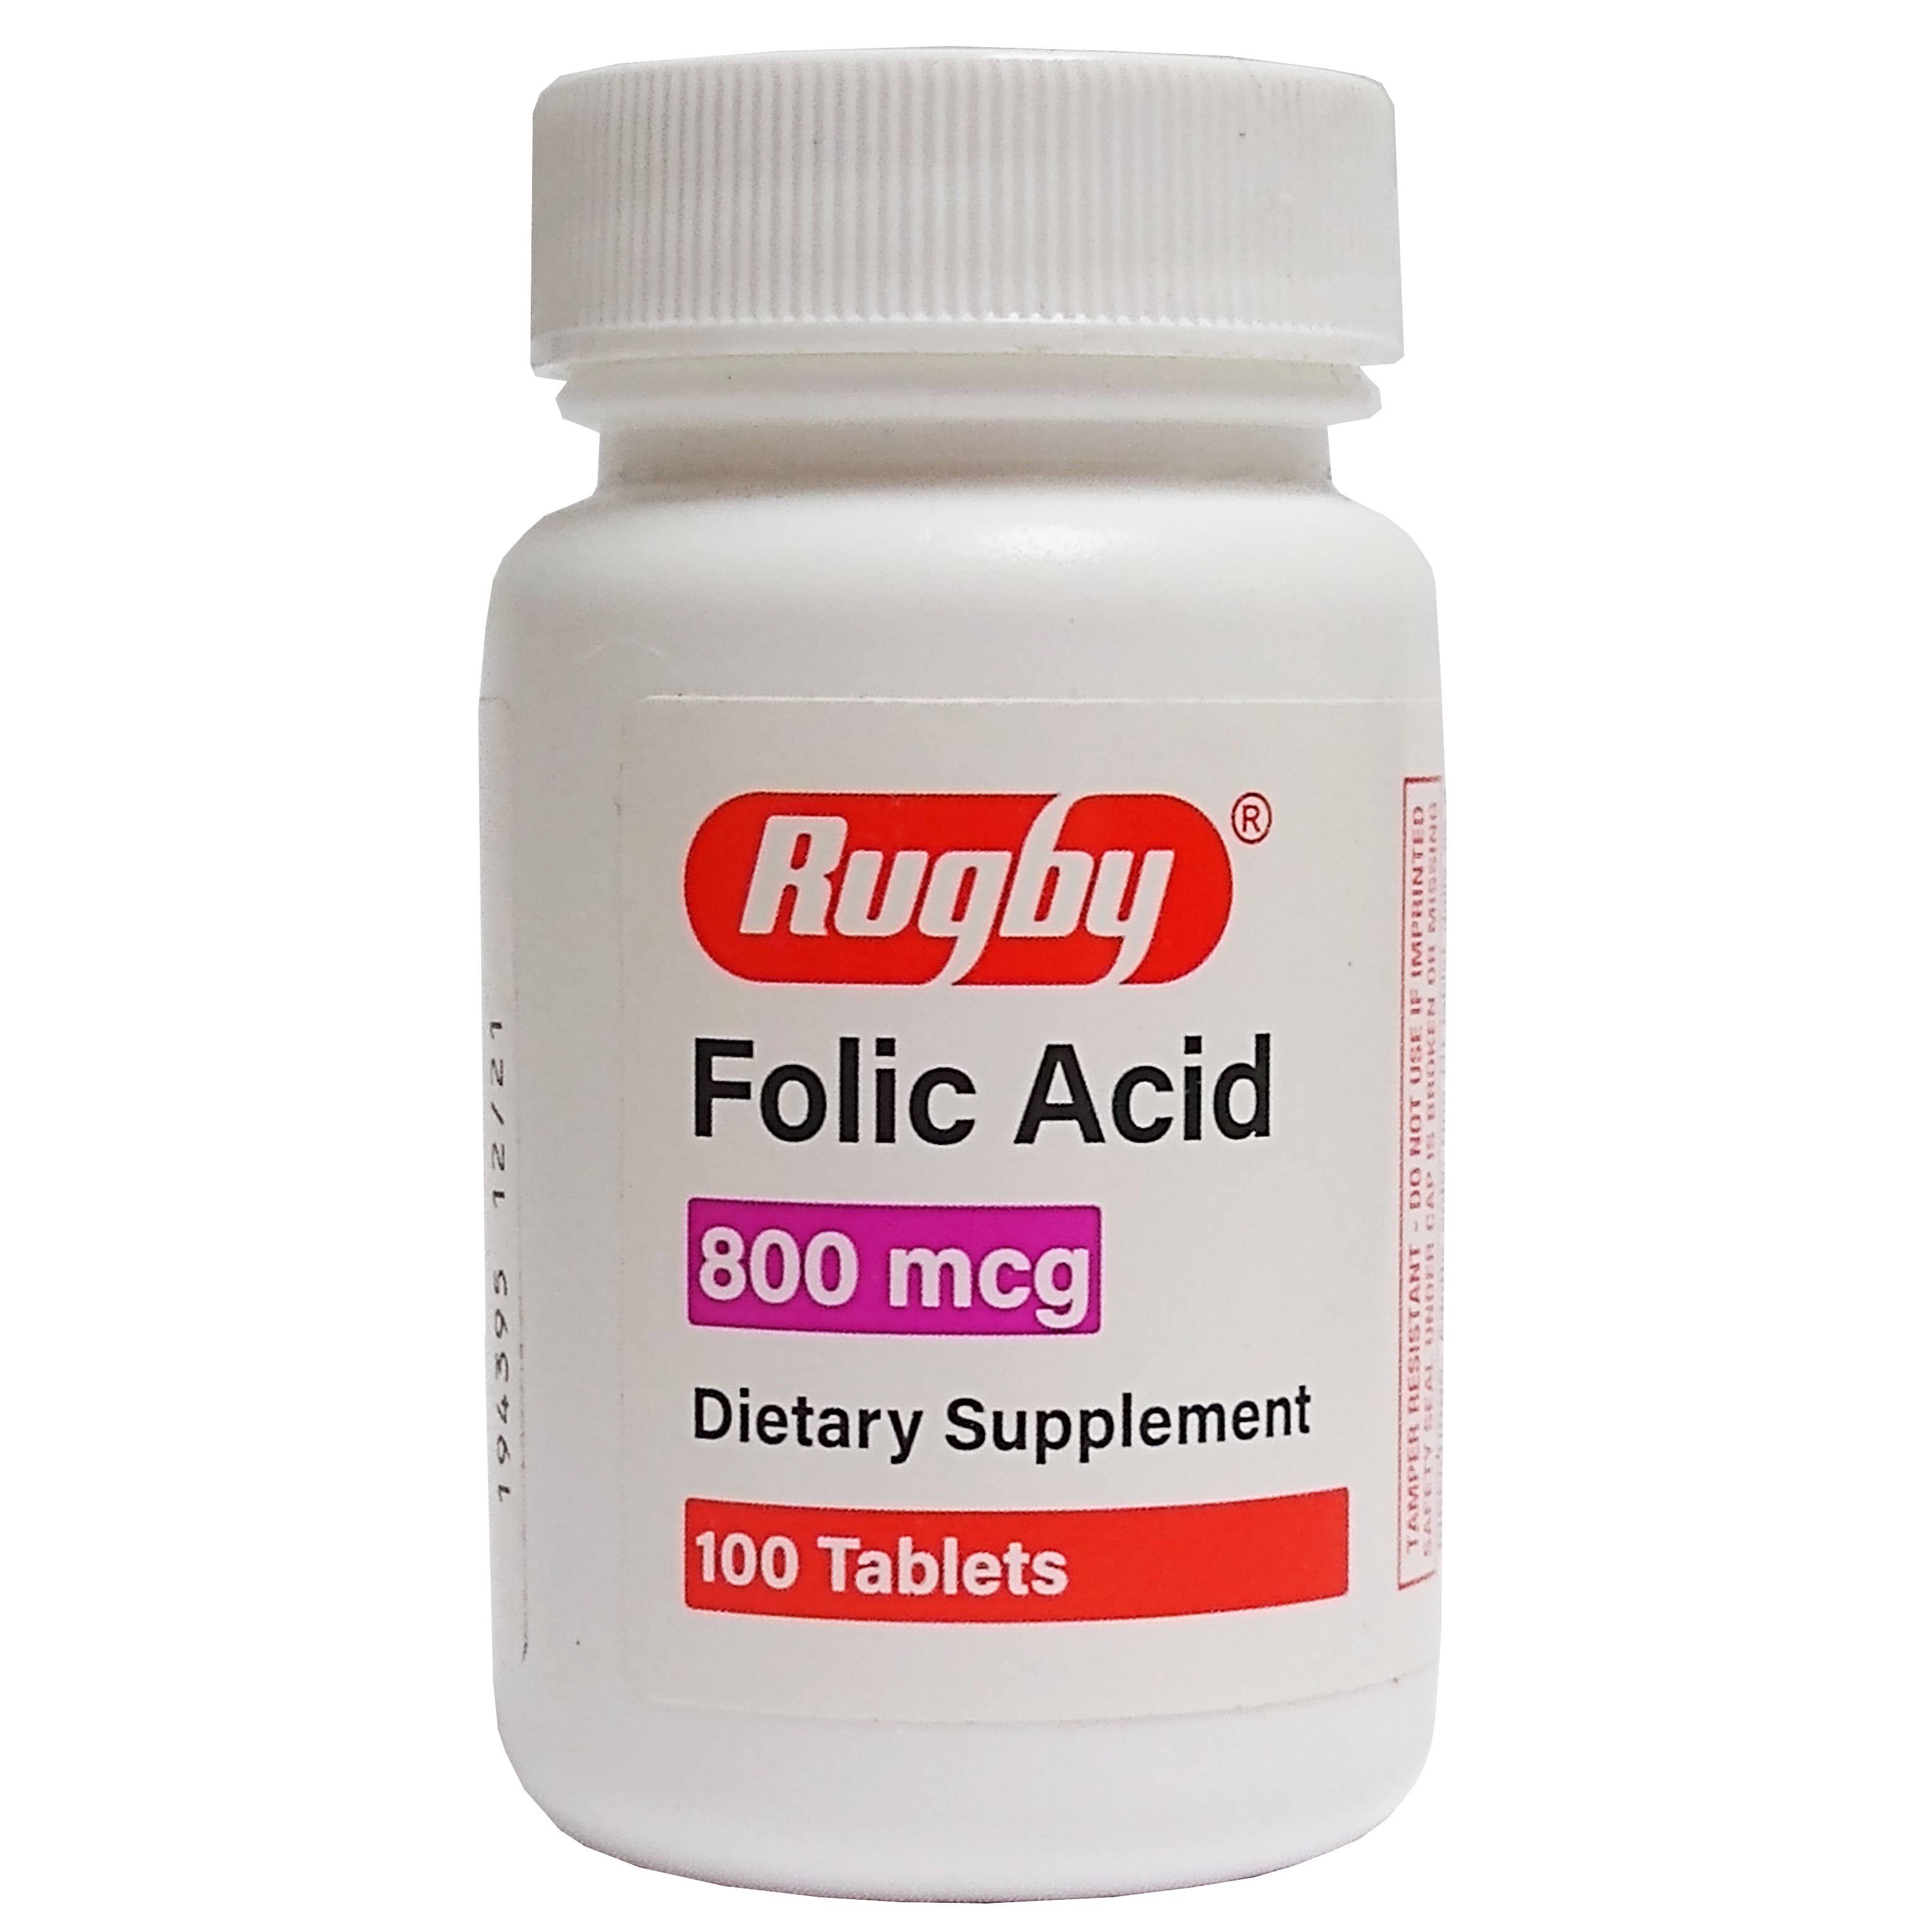 Rugby Folic Acid 800 mcg 100 Tablets, 1 Bottle Each, by Rugby